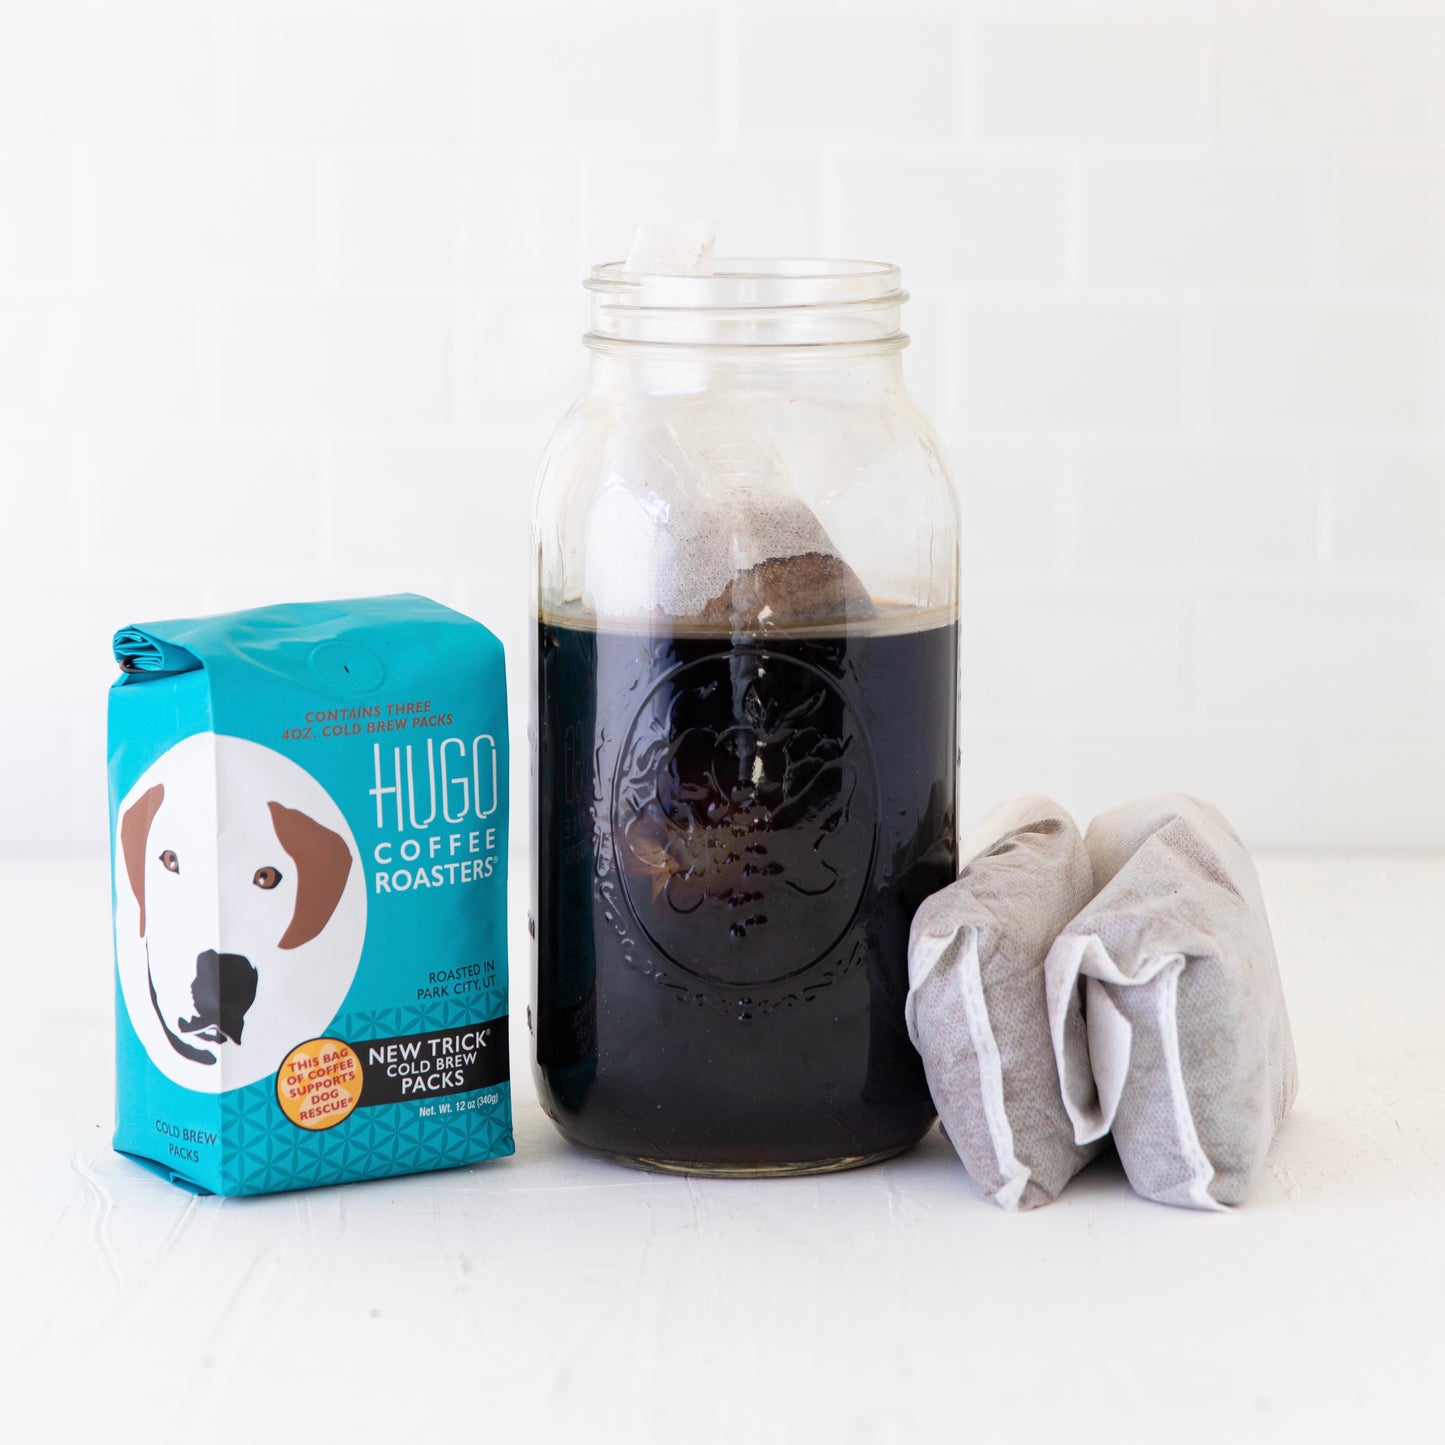 New Trick Cold Brew Packs